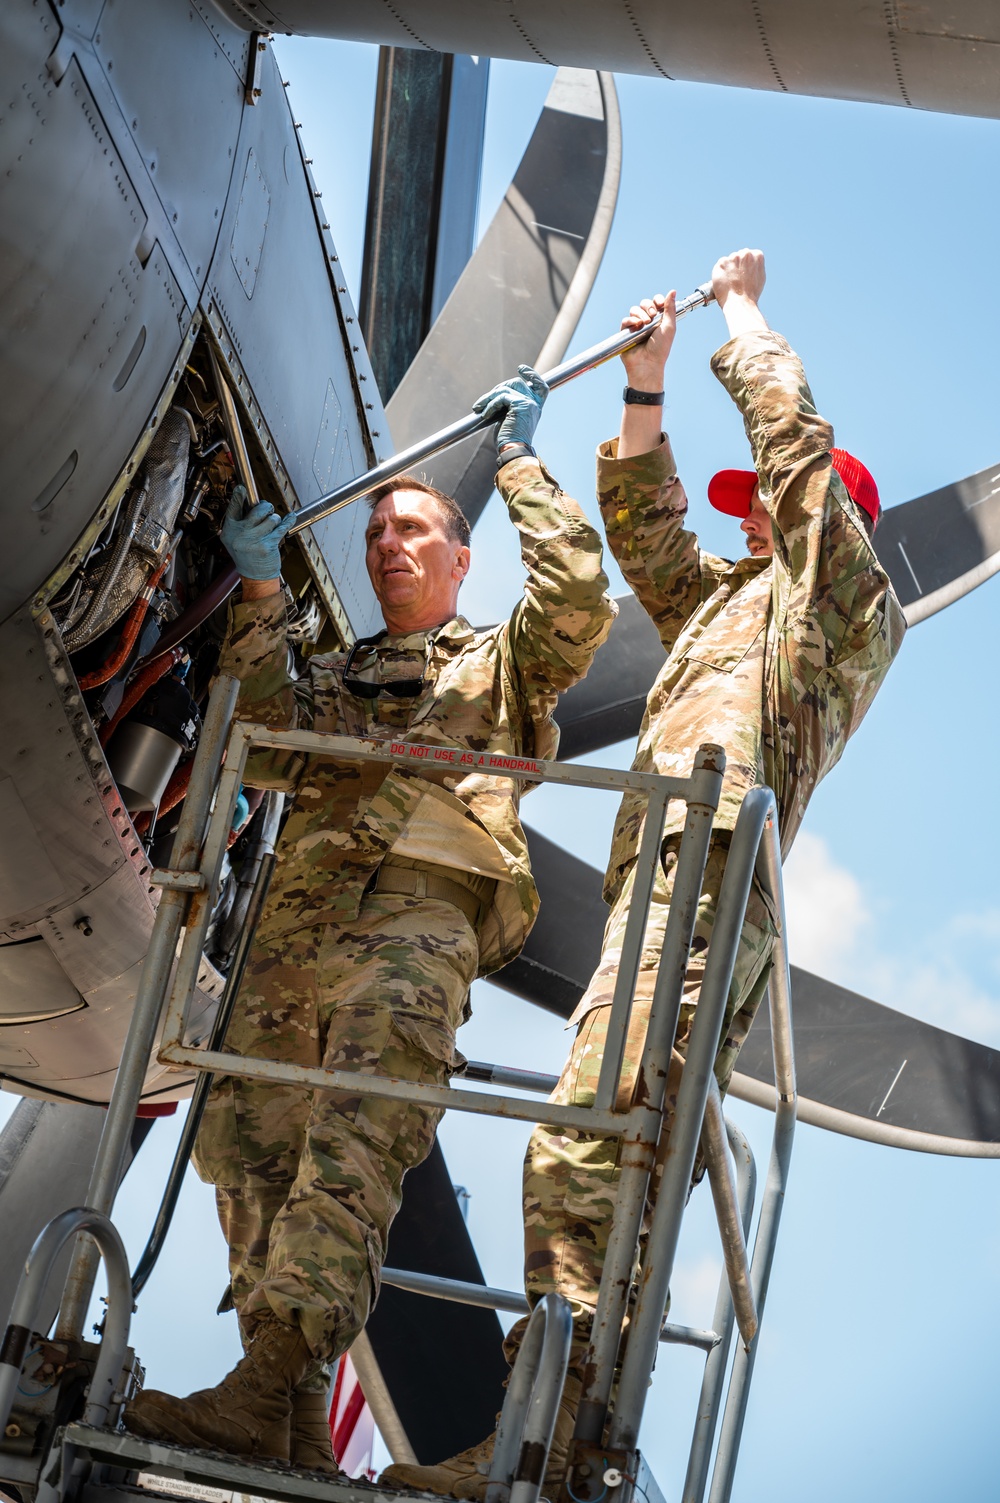 153rd Airlift Wing Maintains C-130 Propeller at Channel Islands ANG Station